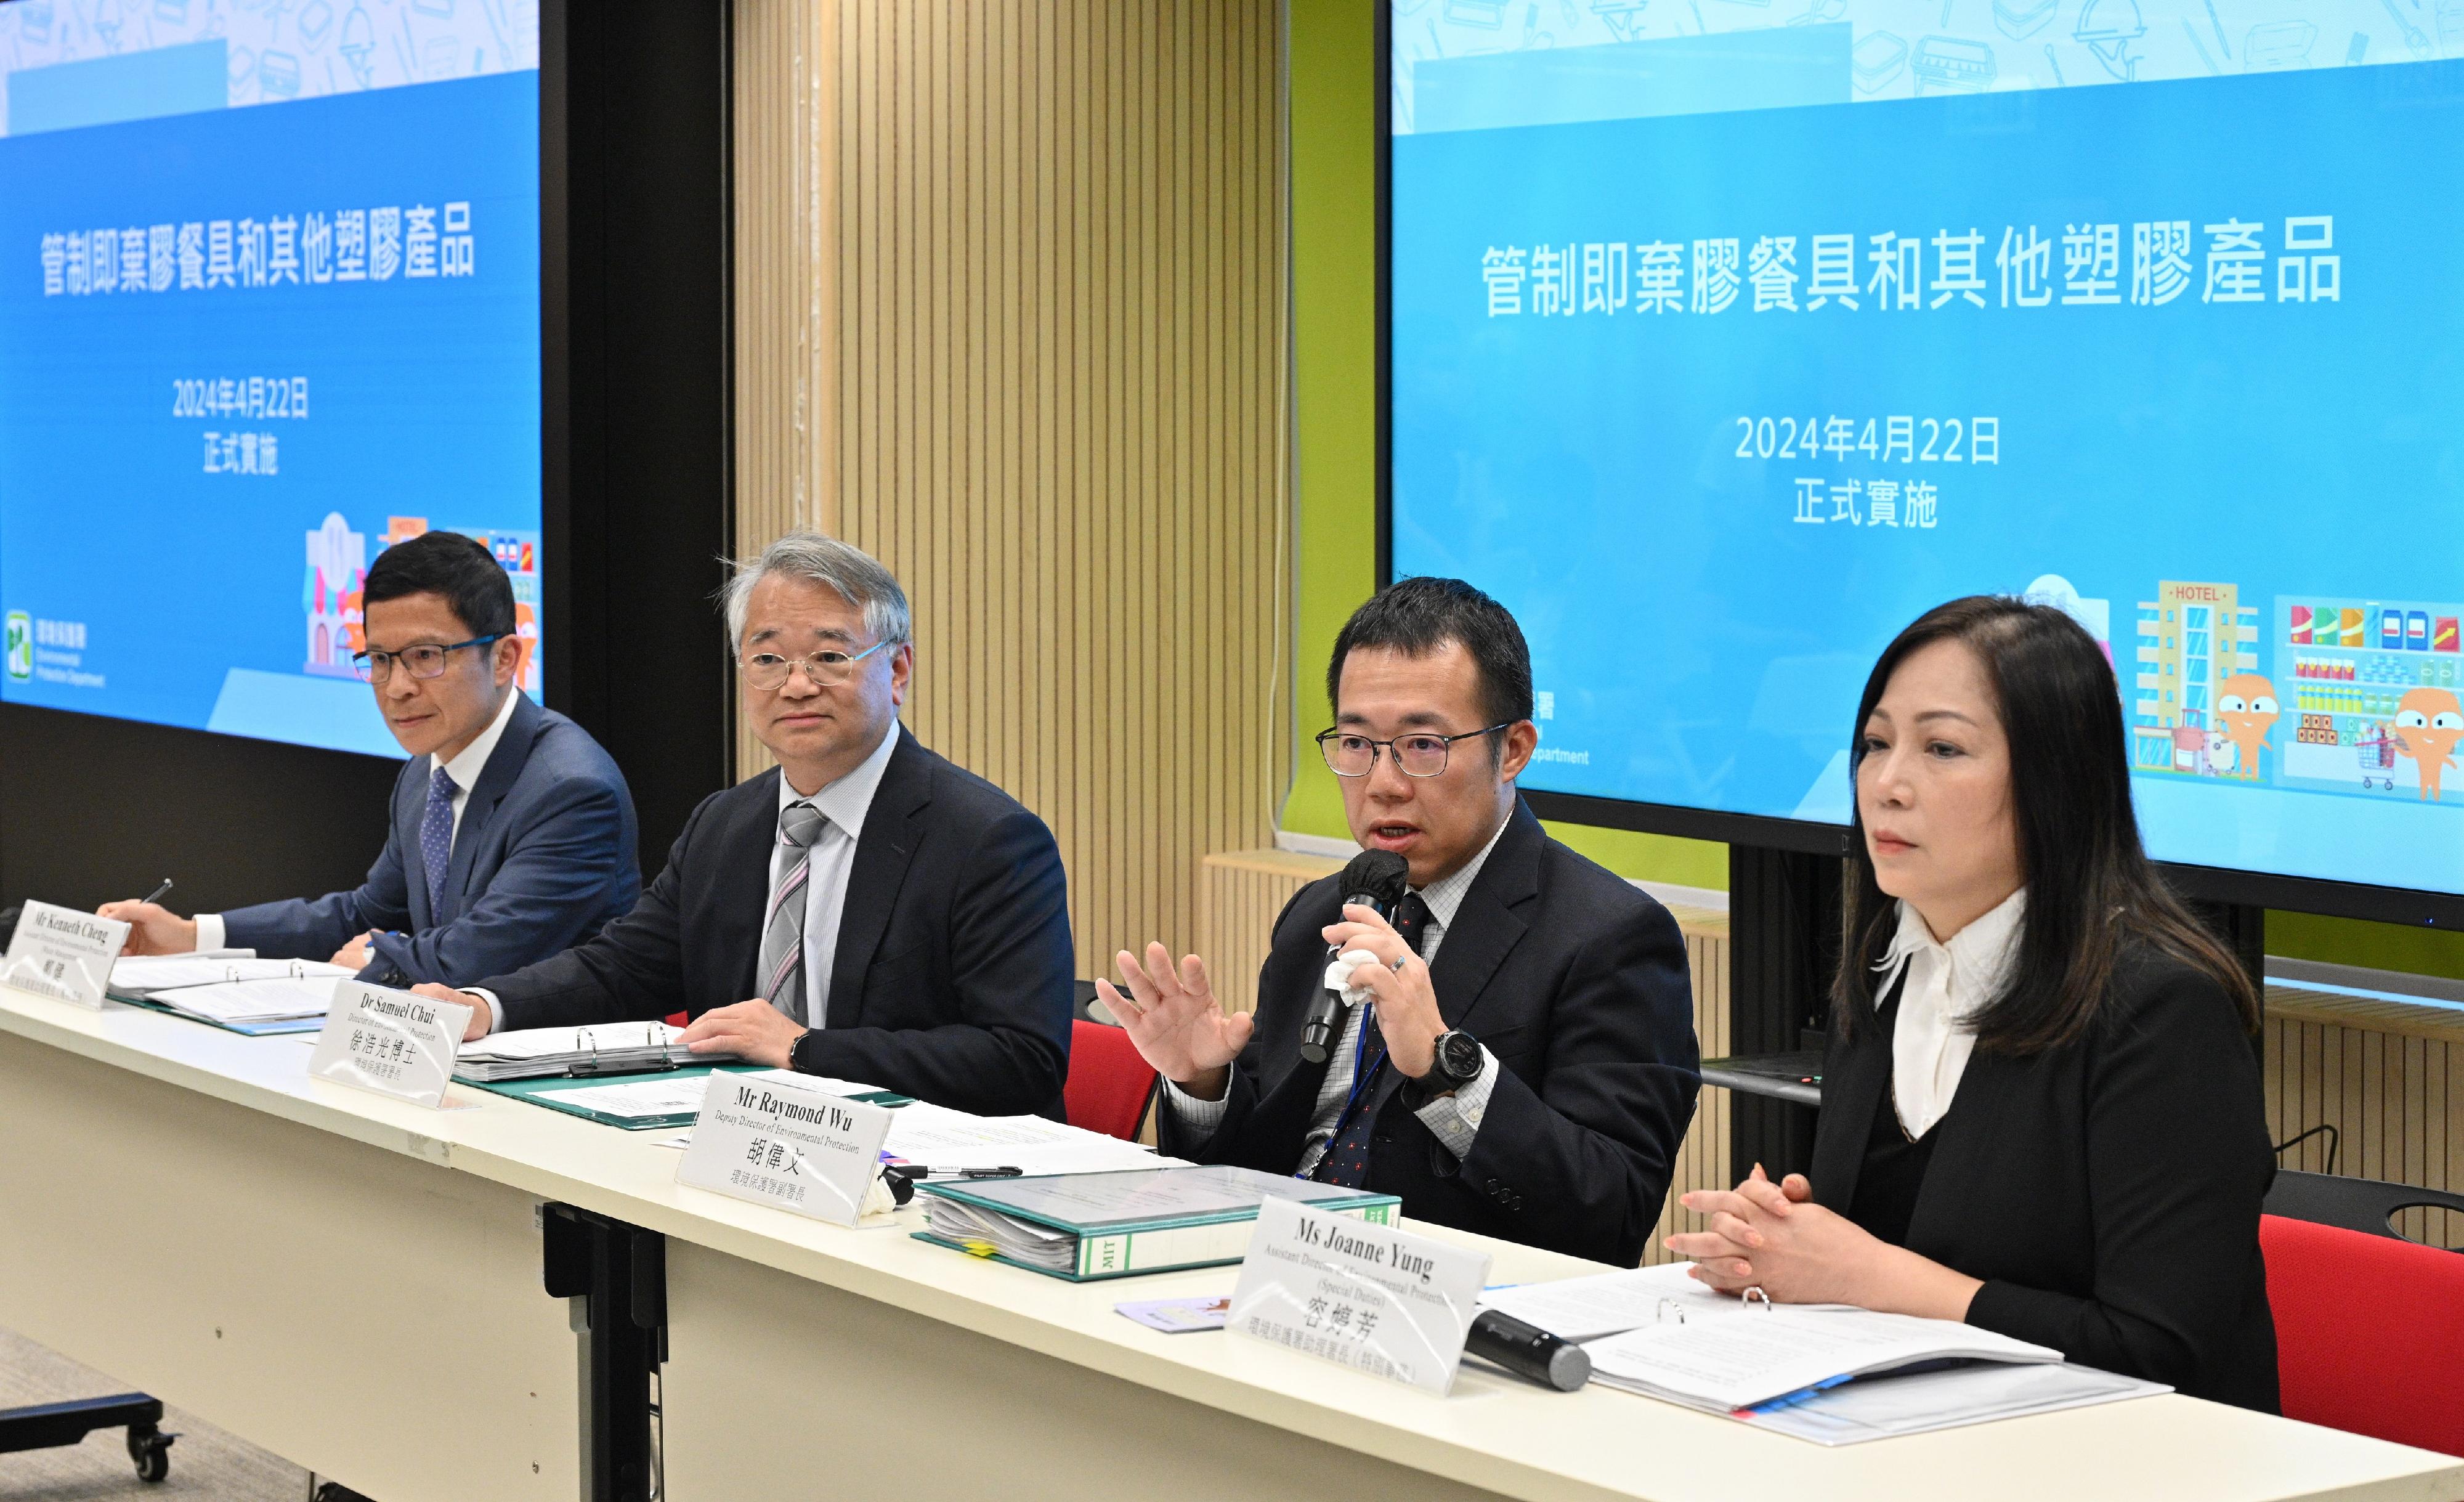 The relevant legislation for the regulation of disposable plastic tableware and other plastic products will come into effect on April 22 (Monday, Earth Day), and the first six months following the implementation will be designated as an adaptation period. The Director of Environmental Protection, Dr Samuel Chui (second left); Deputy Director of Environmental Protection Mr Raymond Wu (second right); Assistant Director of Environmental Protection (Waste Management) Mr Kenneth Cheng (first left) and Assistant Director of Environmental Protection (Special Duties) Ms Joanne Yung (first right), attended a briefing session today (April 12) on the arrangements for the adaptation period and the publicity and education work items on the commencement of the new regulation, and answered questions from the press during question-and-answer session.